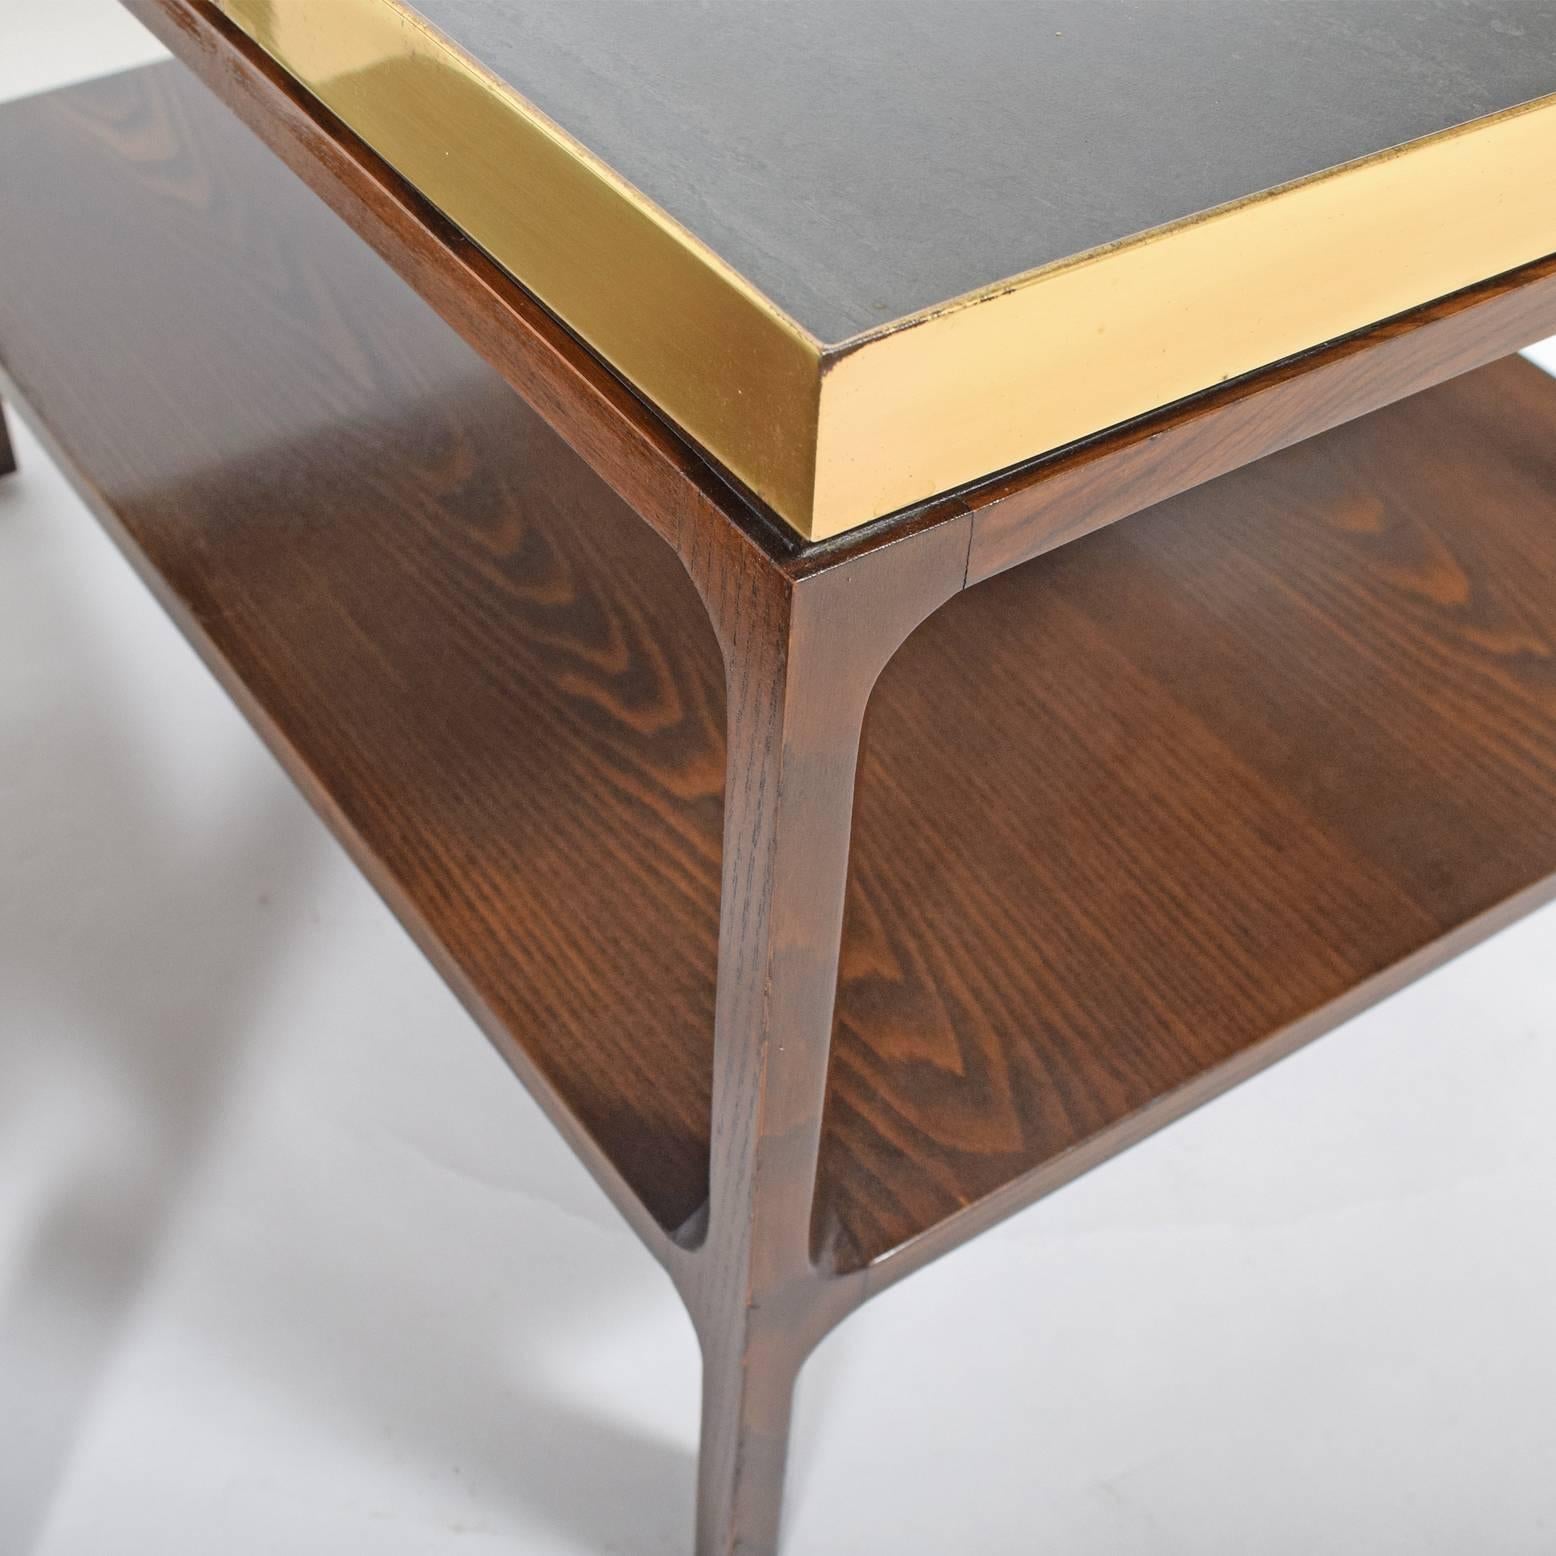 Mid-20th Century Pair of Side Tables by Edward Wormley for Dunbar